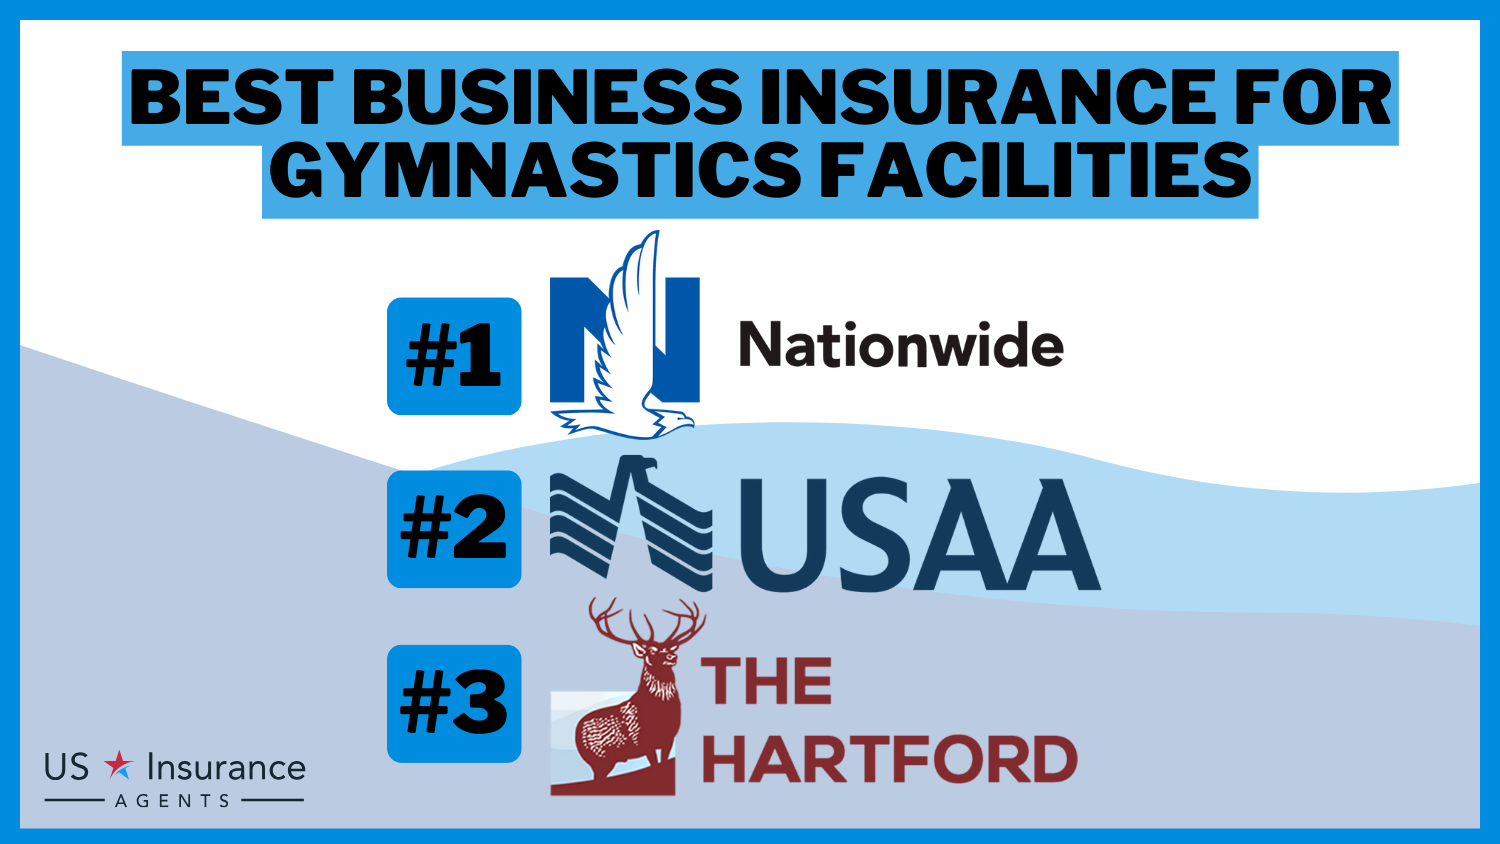 Nationwide, USAA and The Hartford: Best Business Insurance for Gymnastics Facilities